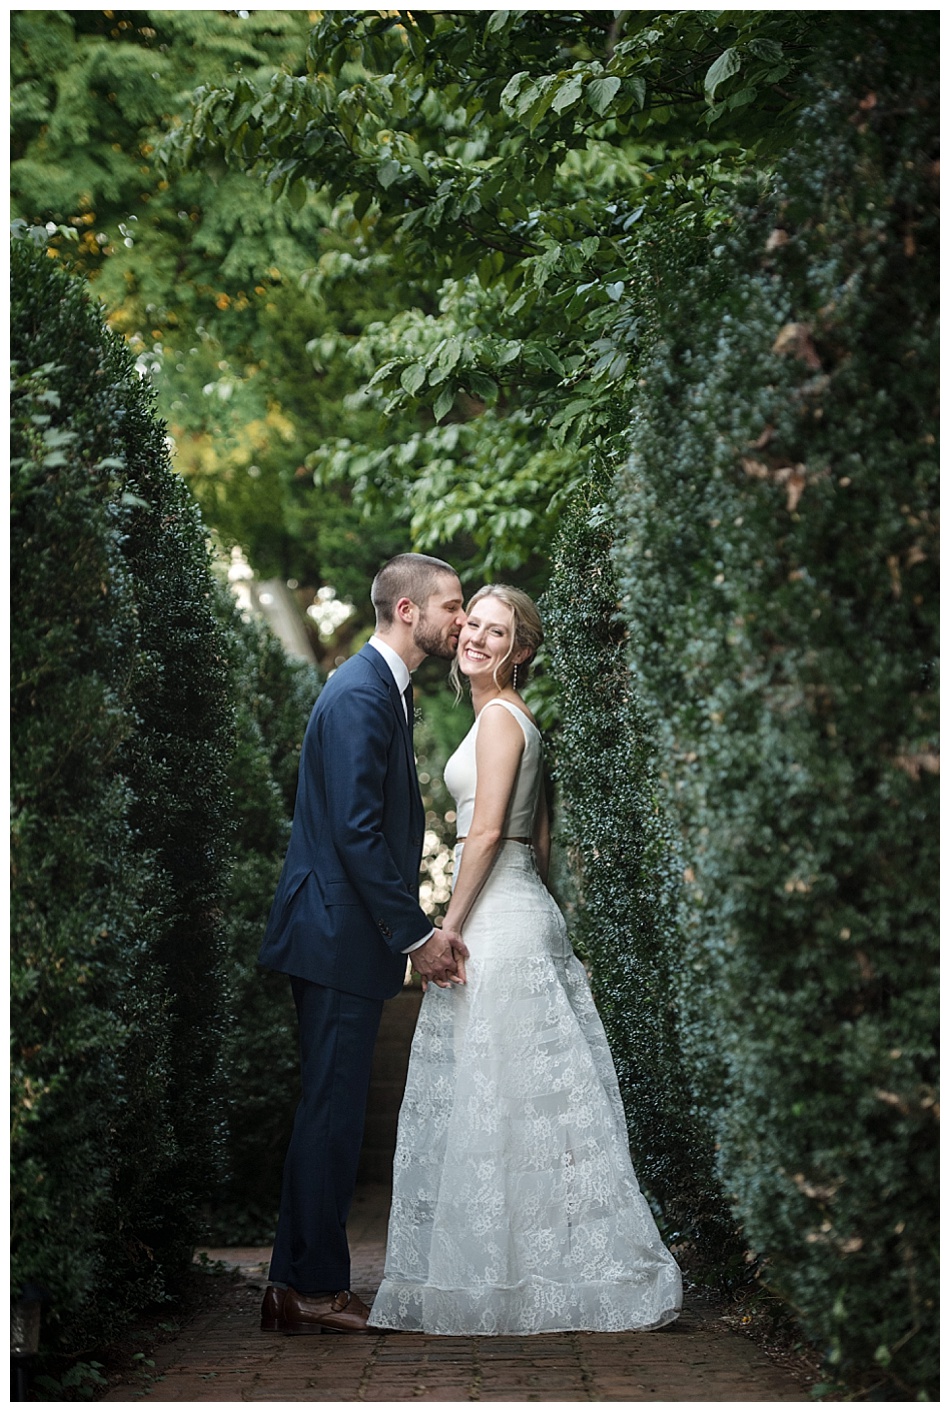 Bride and Groom at Brumby Hall and Gardens